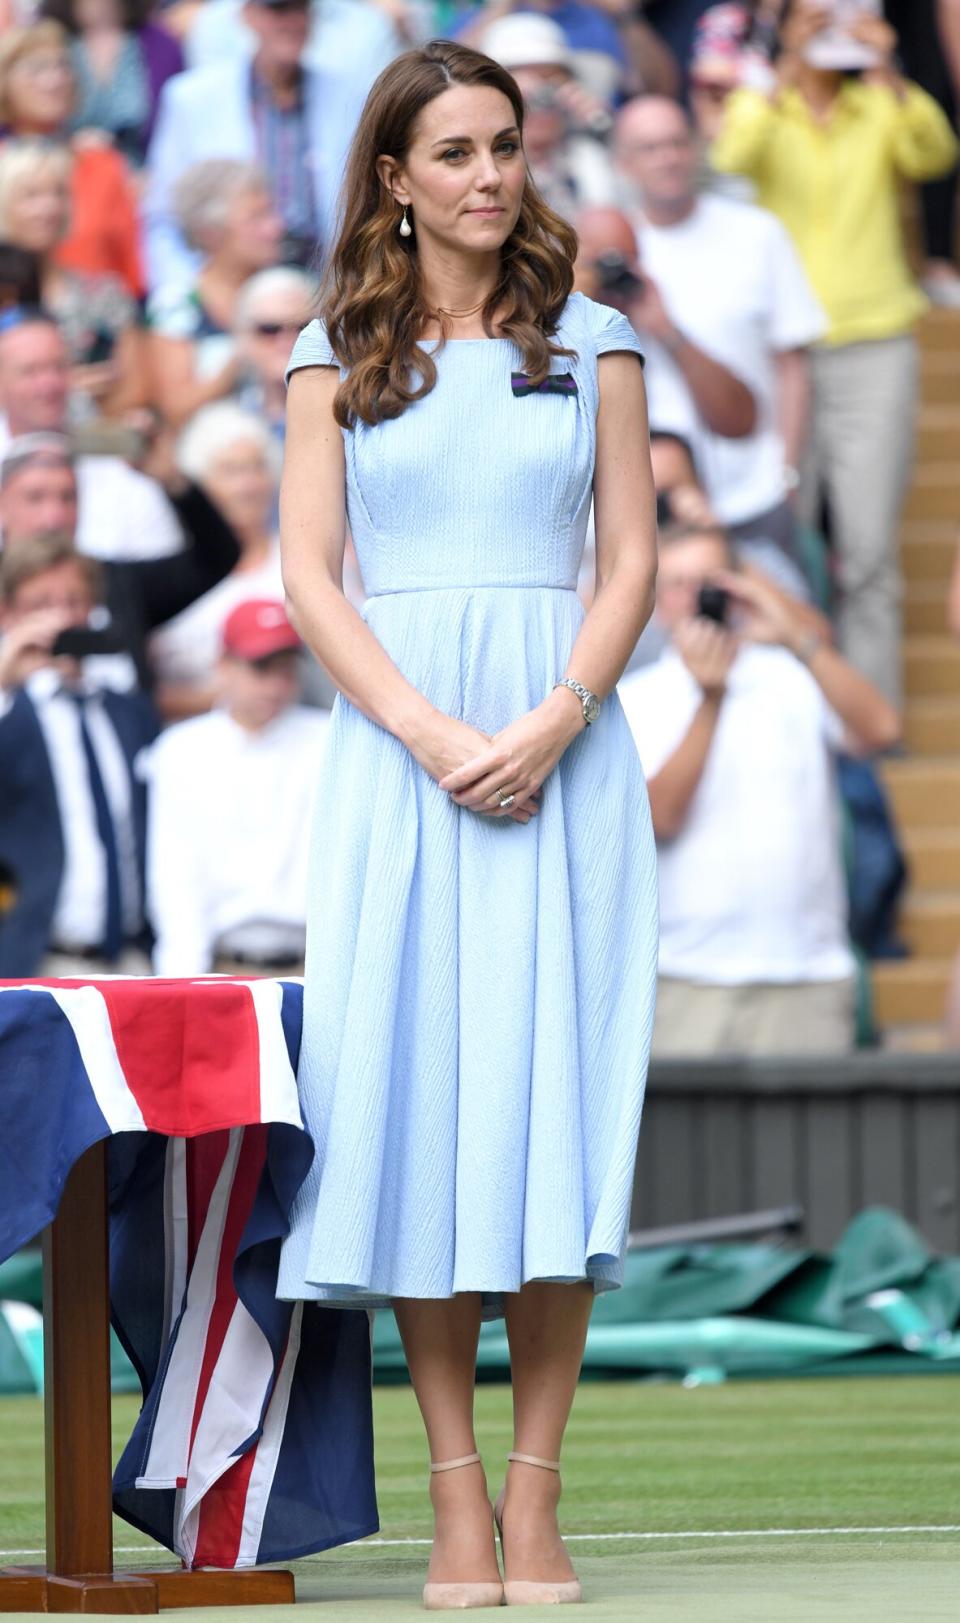 Catherine, Duchess of Cambridge on Centre court during Men's Finals Day of the Wimbledon Tennis Championships at All England Lawn Tennis and Croquet Club on July 14, 2019 in London, England